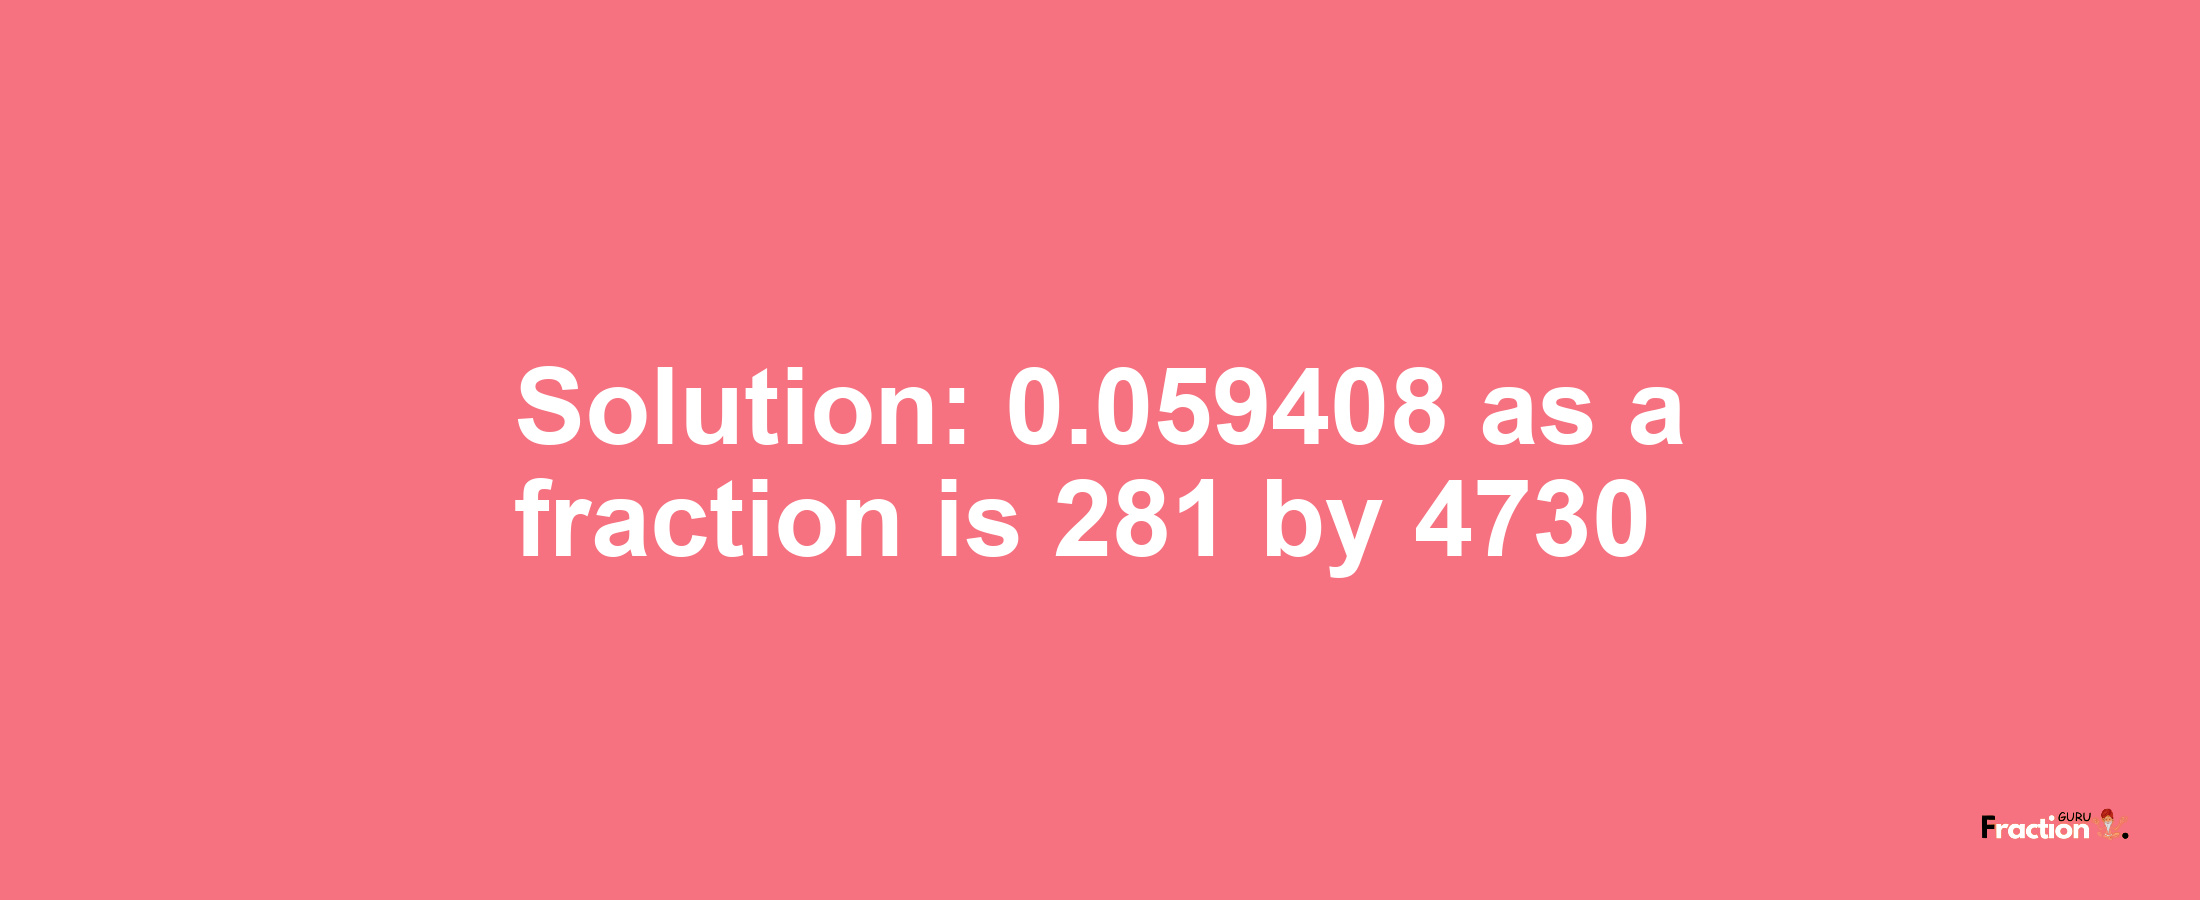 Solution:0.059408 as a fraction is 281/4730